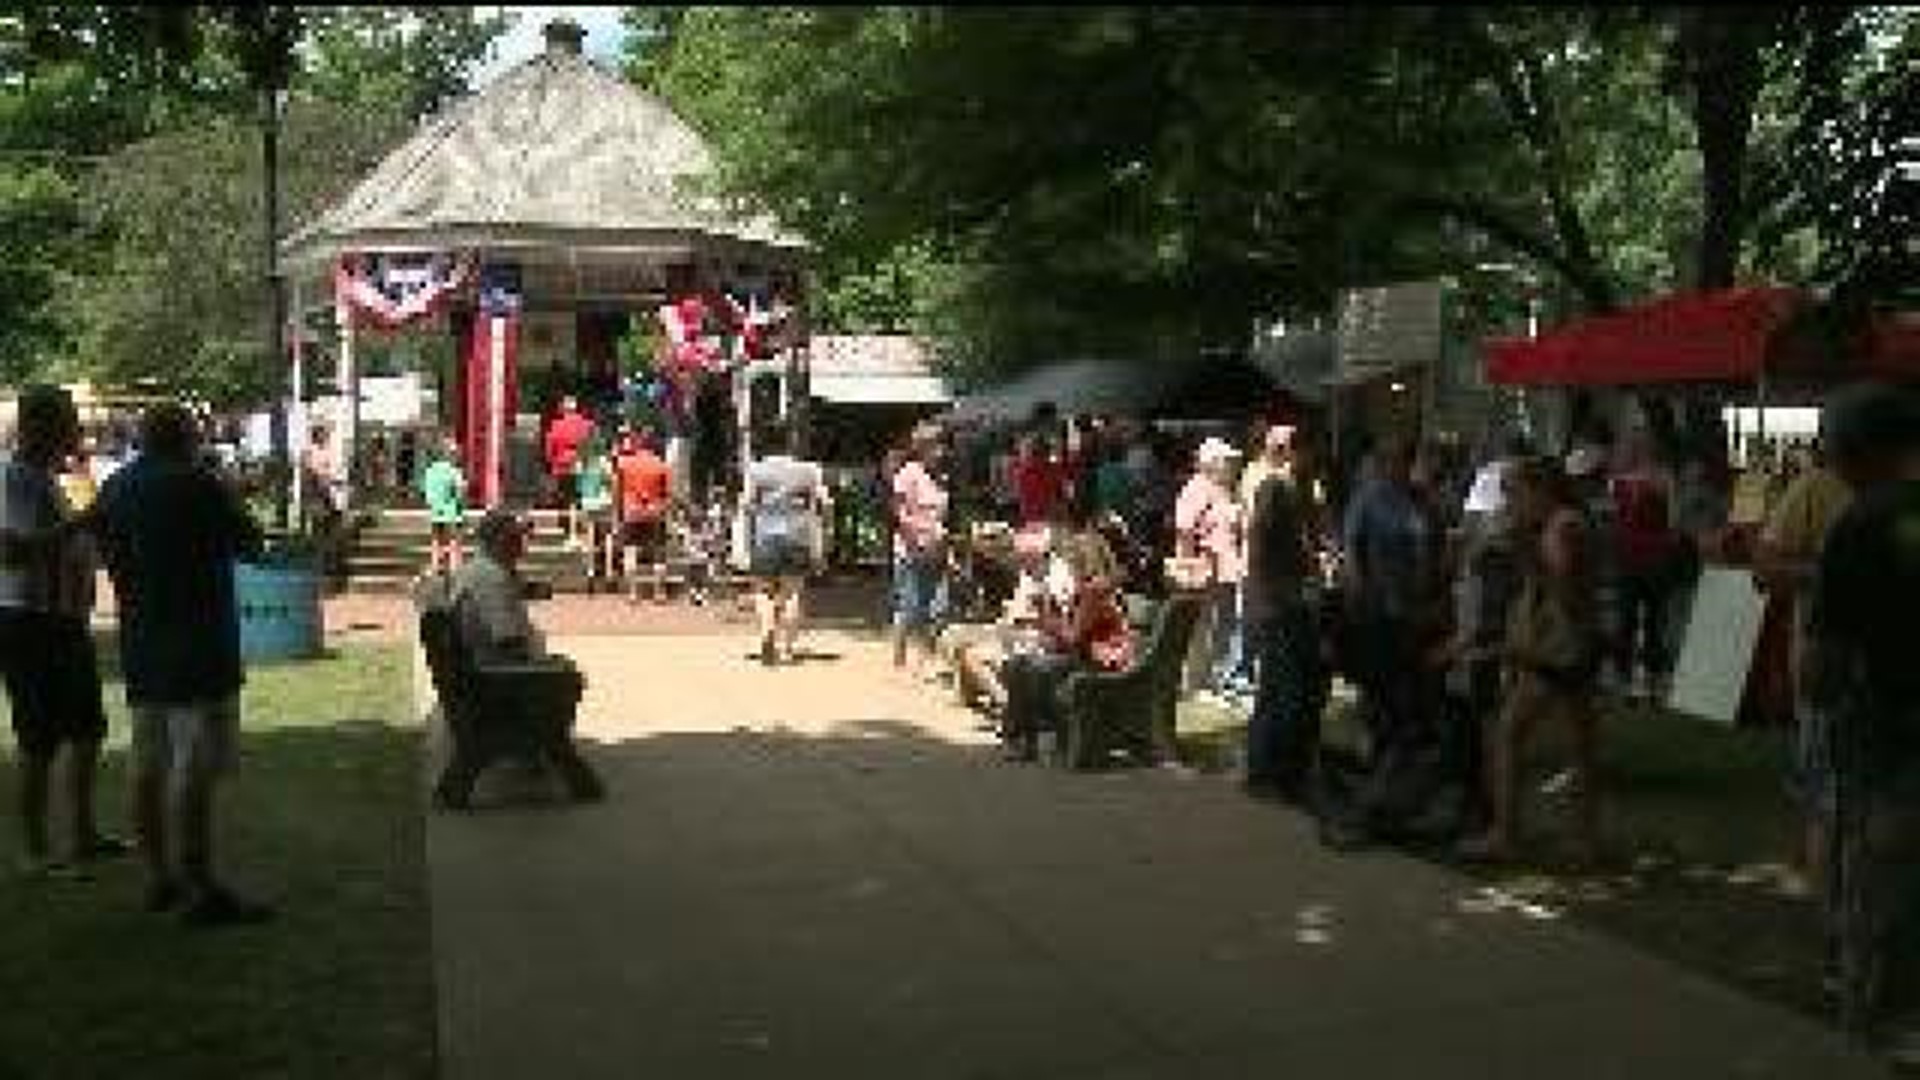 Large Crowd Packs Pineknotter Days